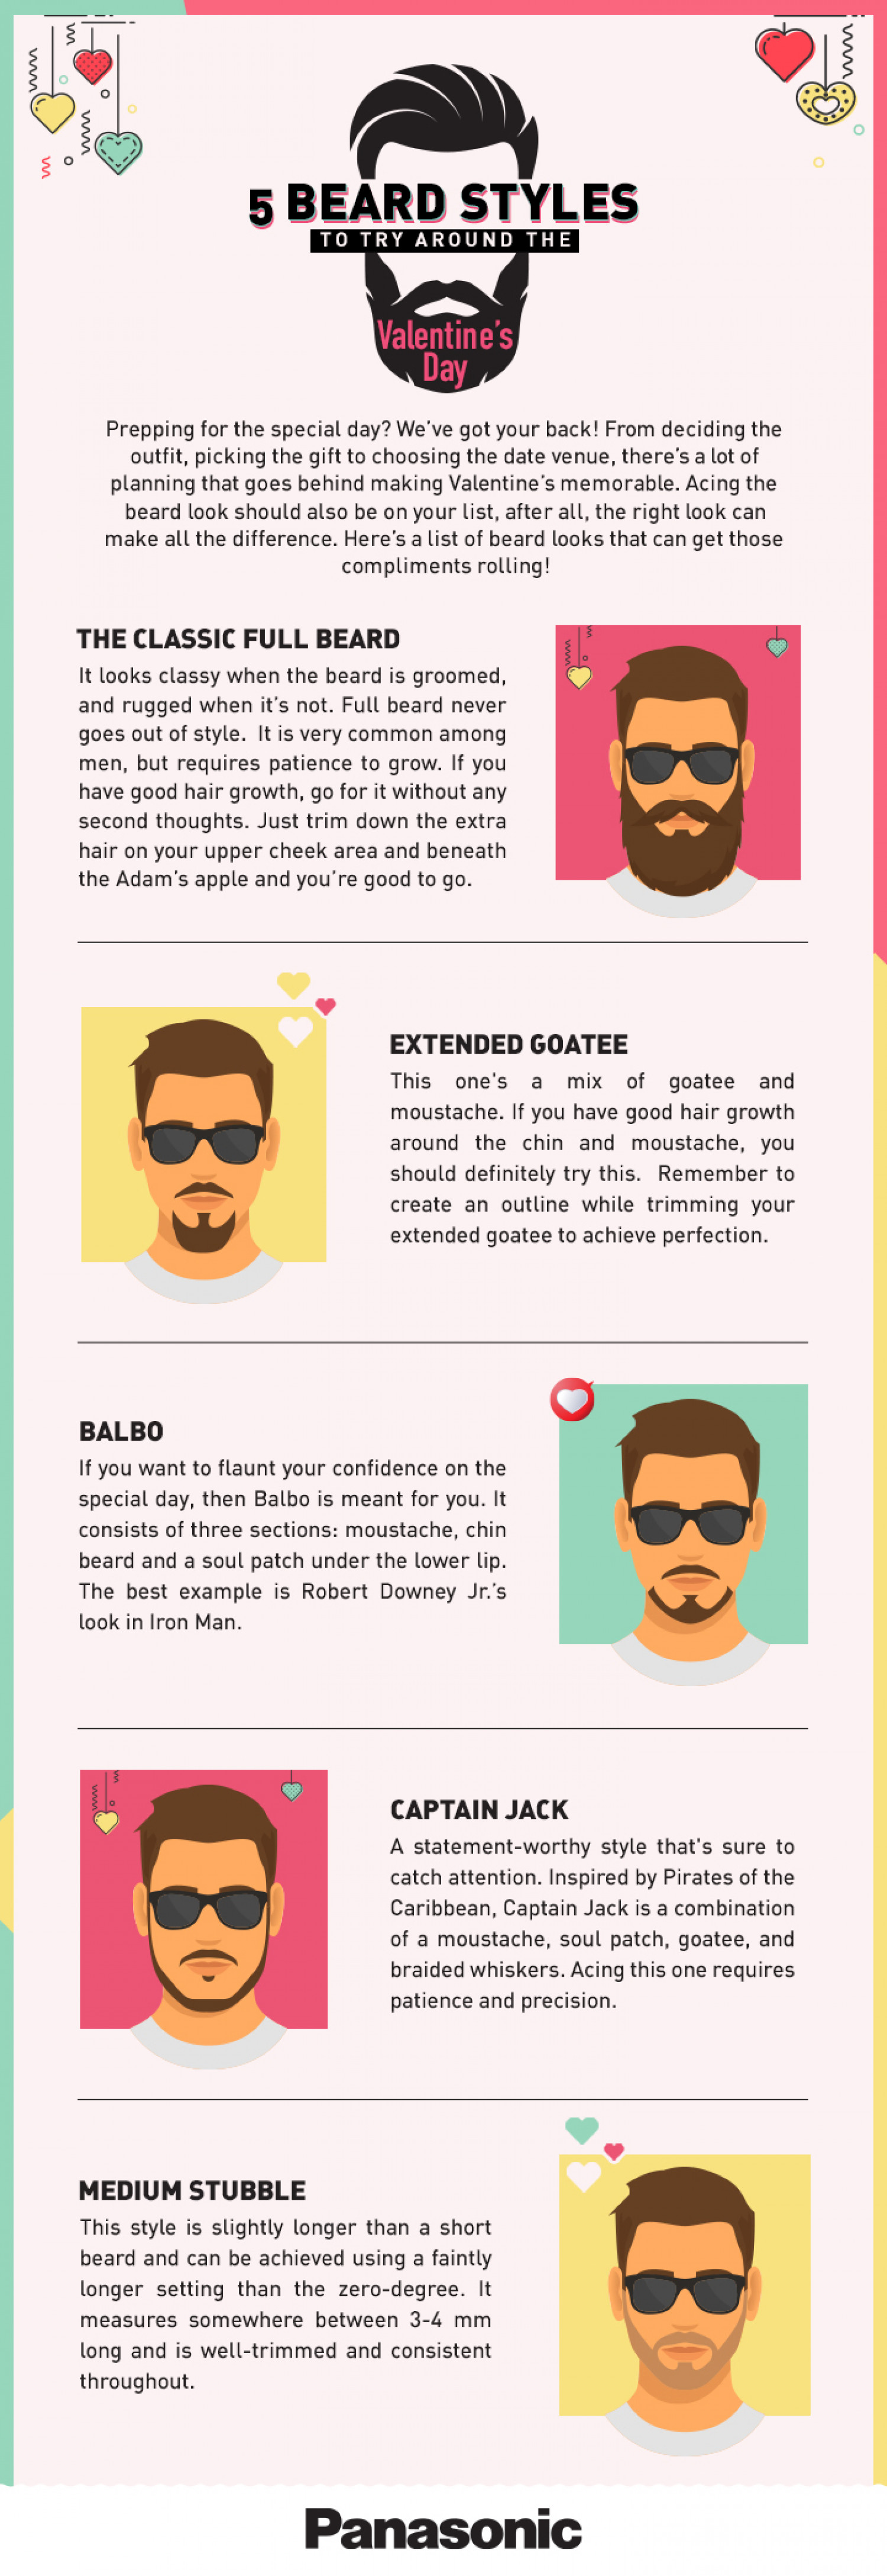 5 Beard Styles for 2022 Valentine's Day Infographic